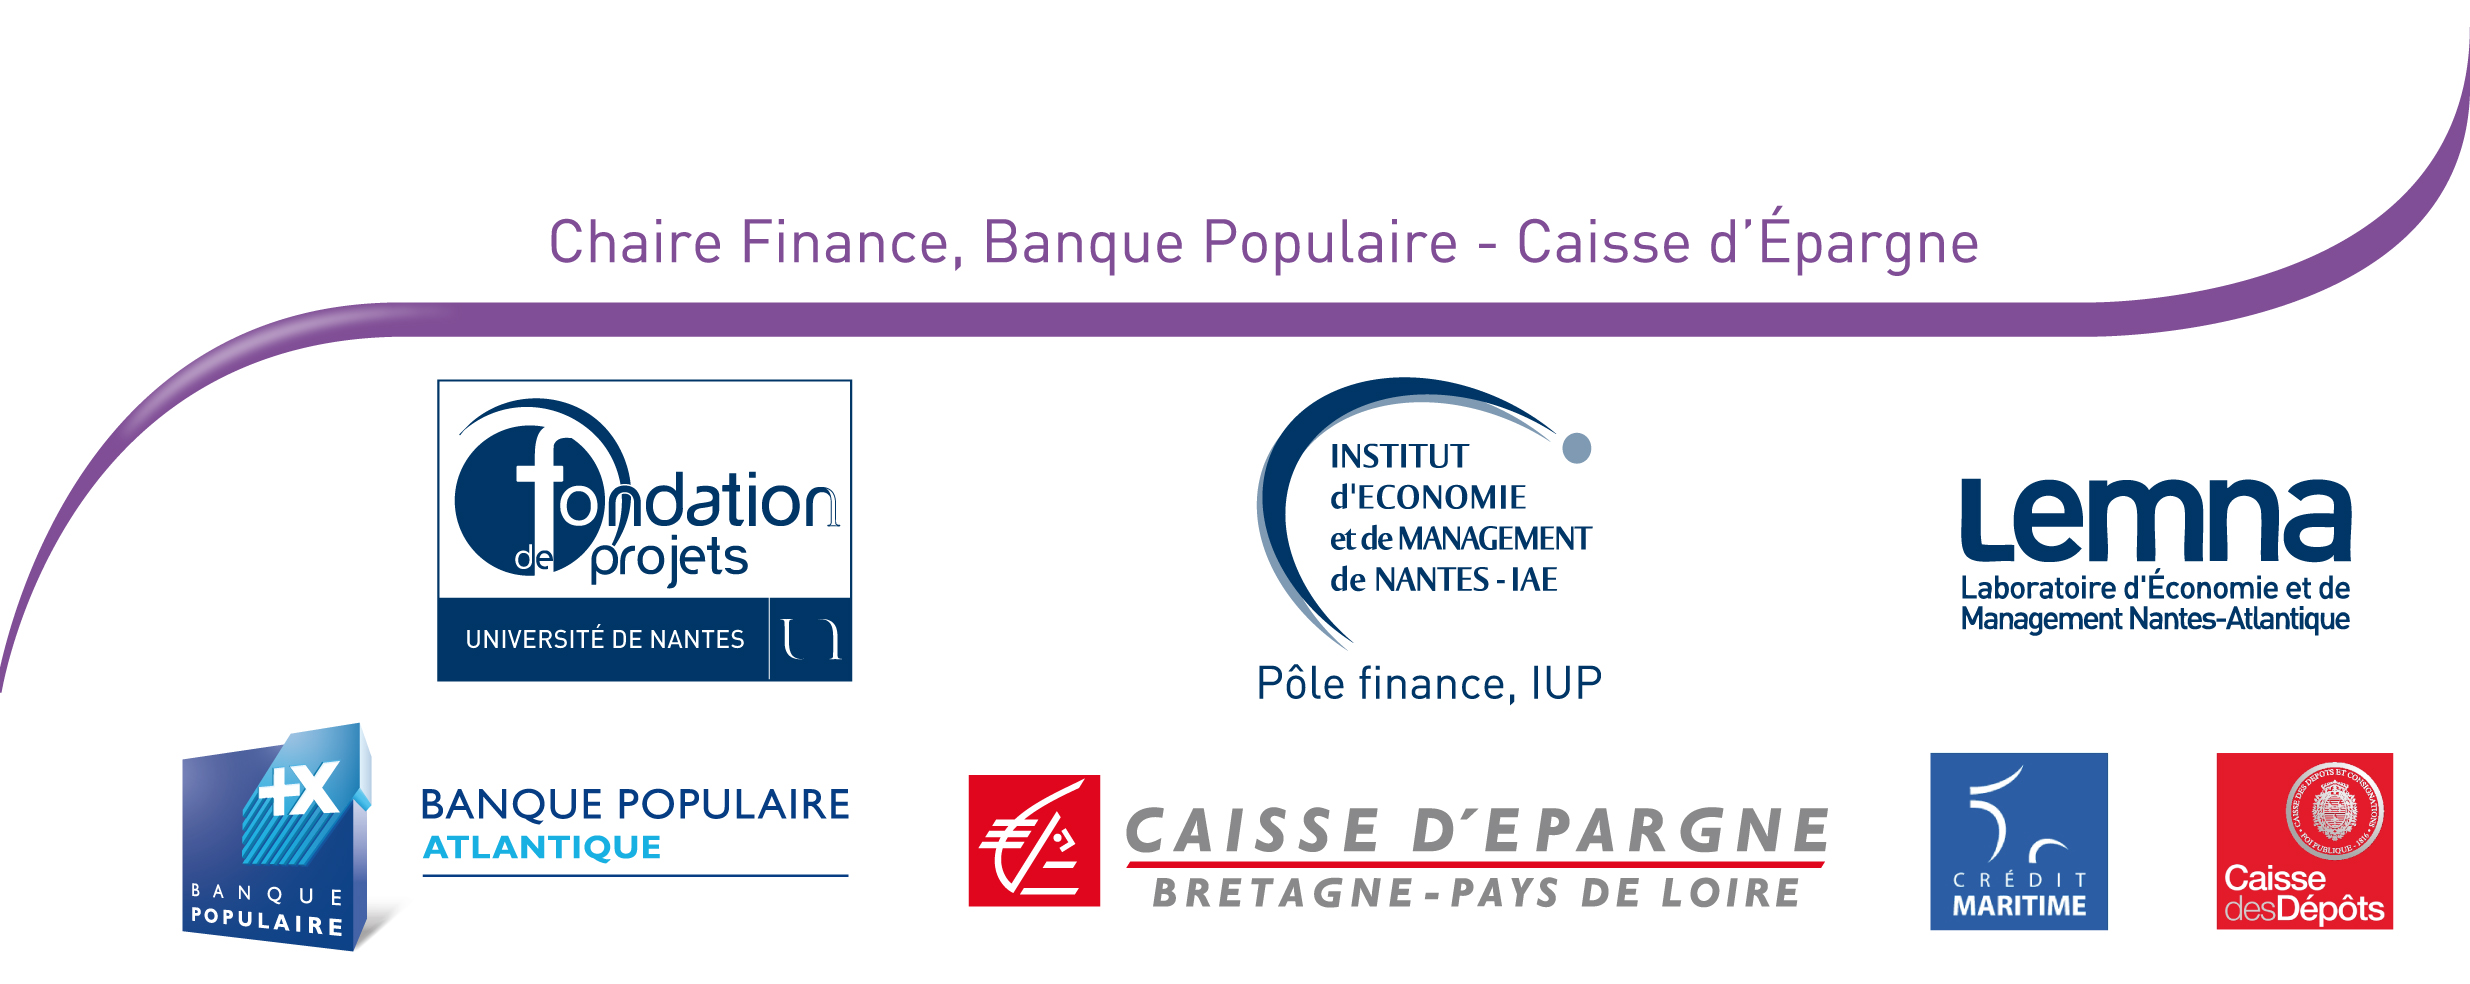 Chaire Finance